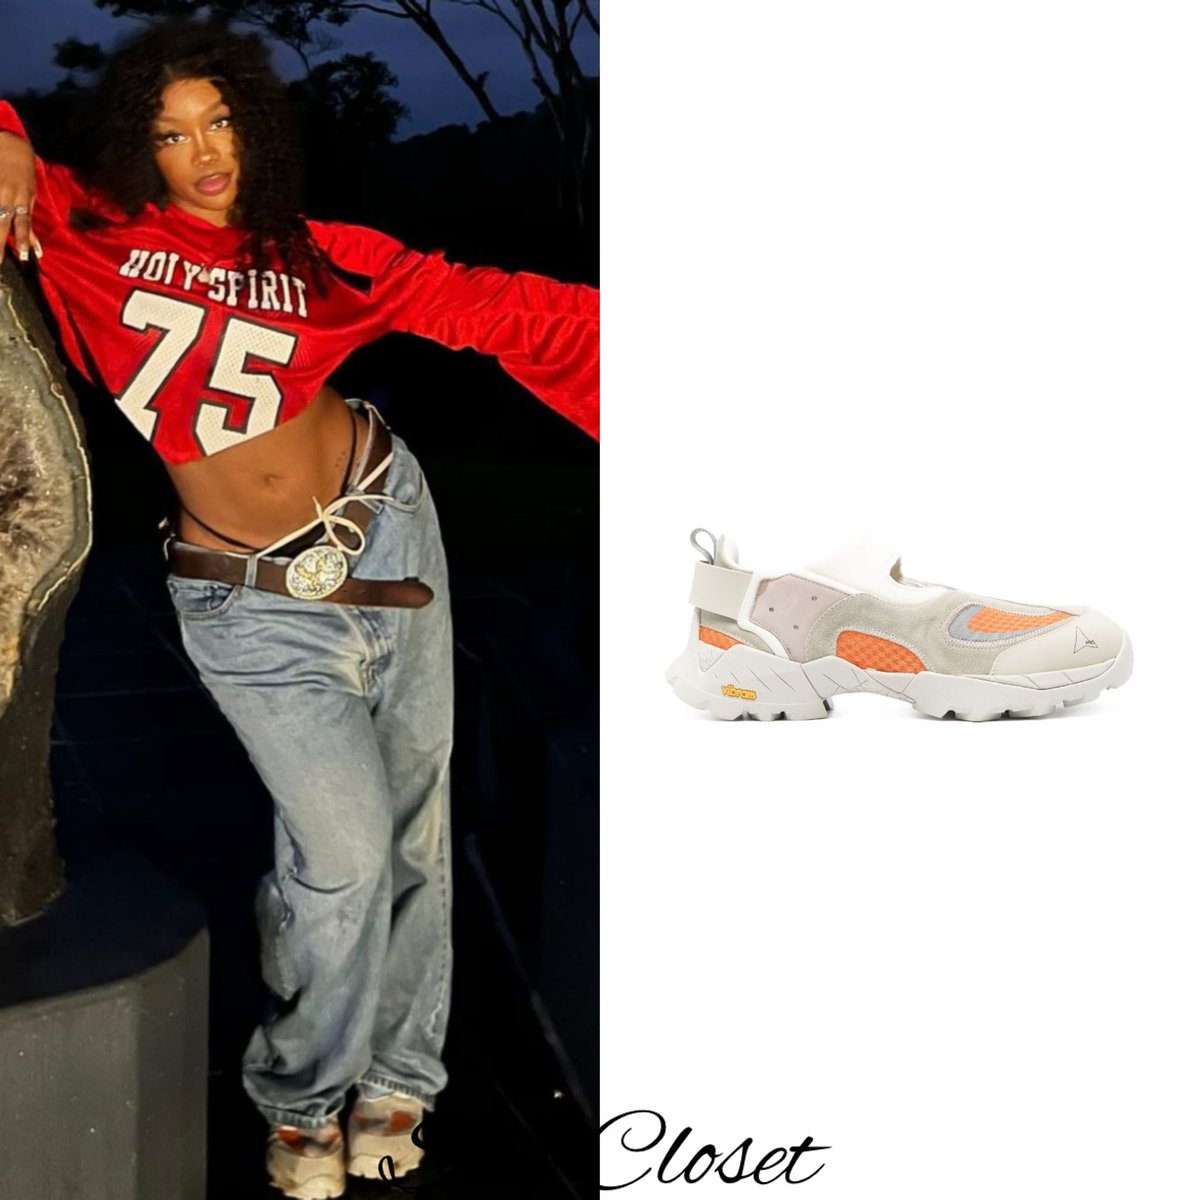 SZA via her instagram 

@sza wore 
- #yvonneandmitchel X #experyments Custom 1/1 Upcycled “Holy Spirit” Jersey 
- #levis 505 Vintage Jeans ($200.87) 
- Custom Butterfly Crystal Thongs With Diamonds ($3.63) on #alibaba.com
- #ROA Rozes Sneakers Sand ($480)